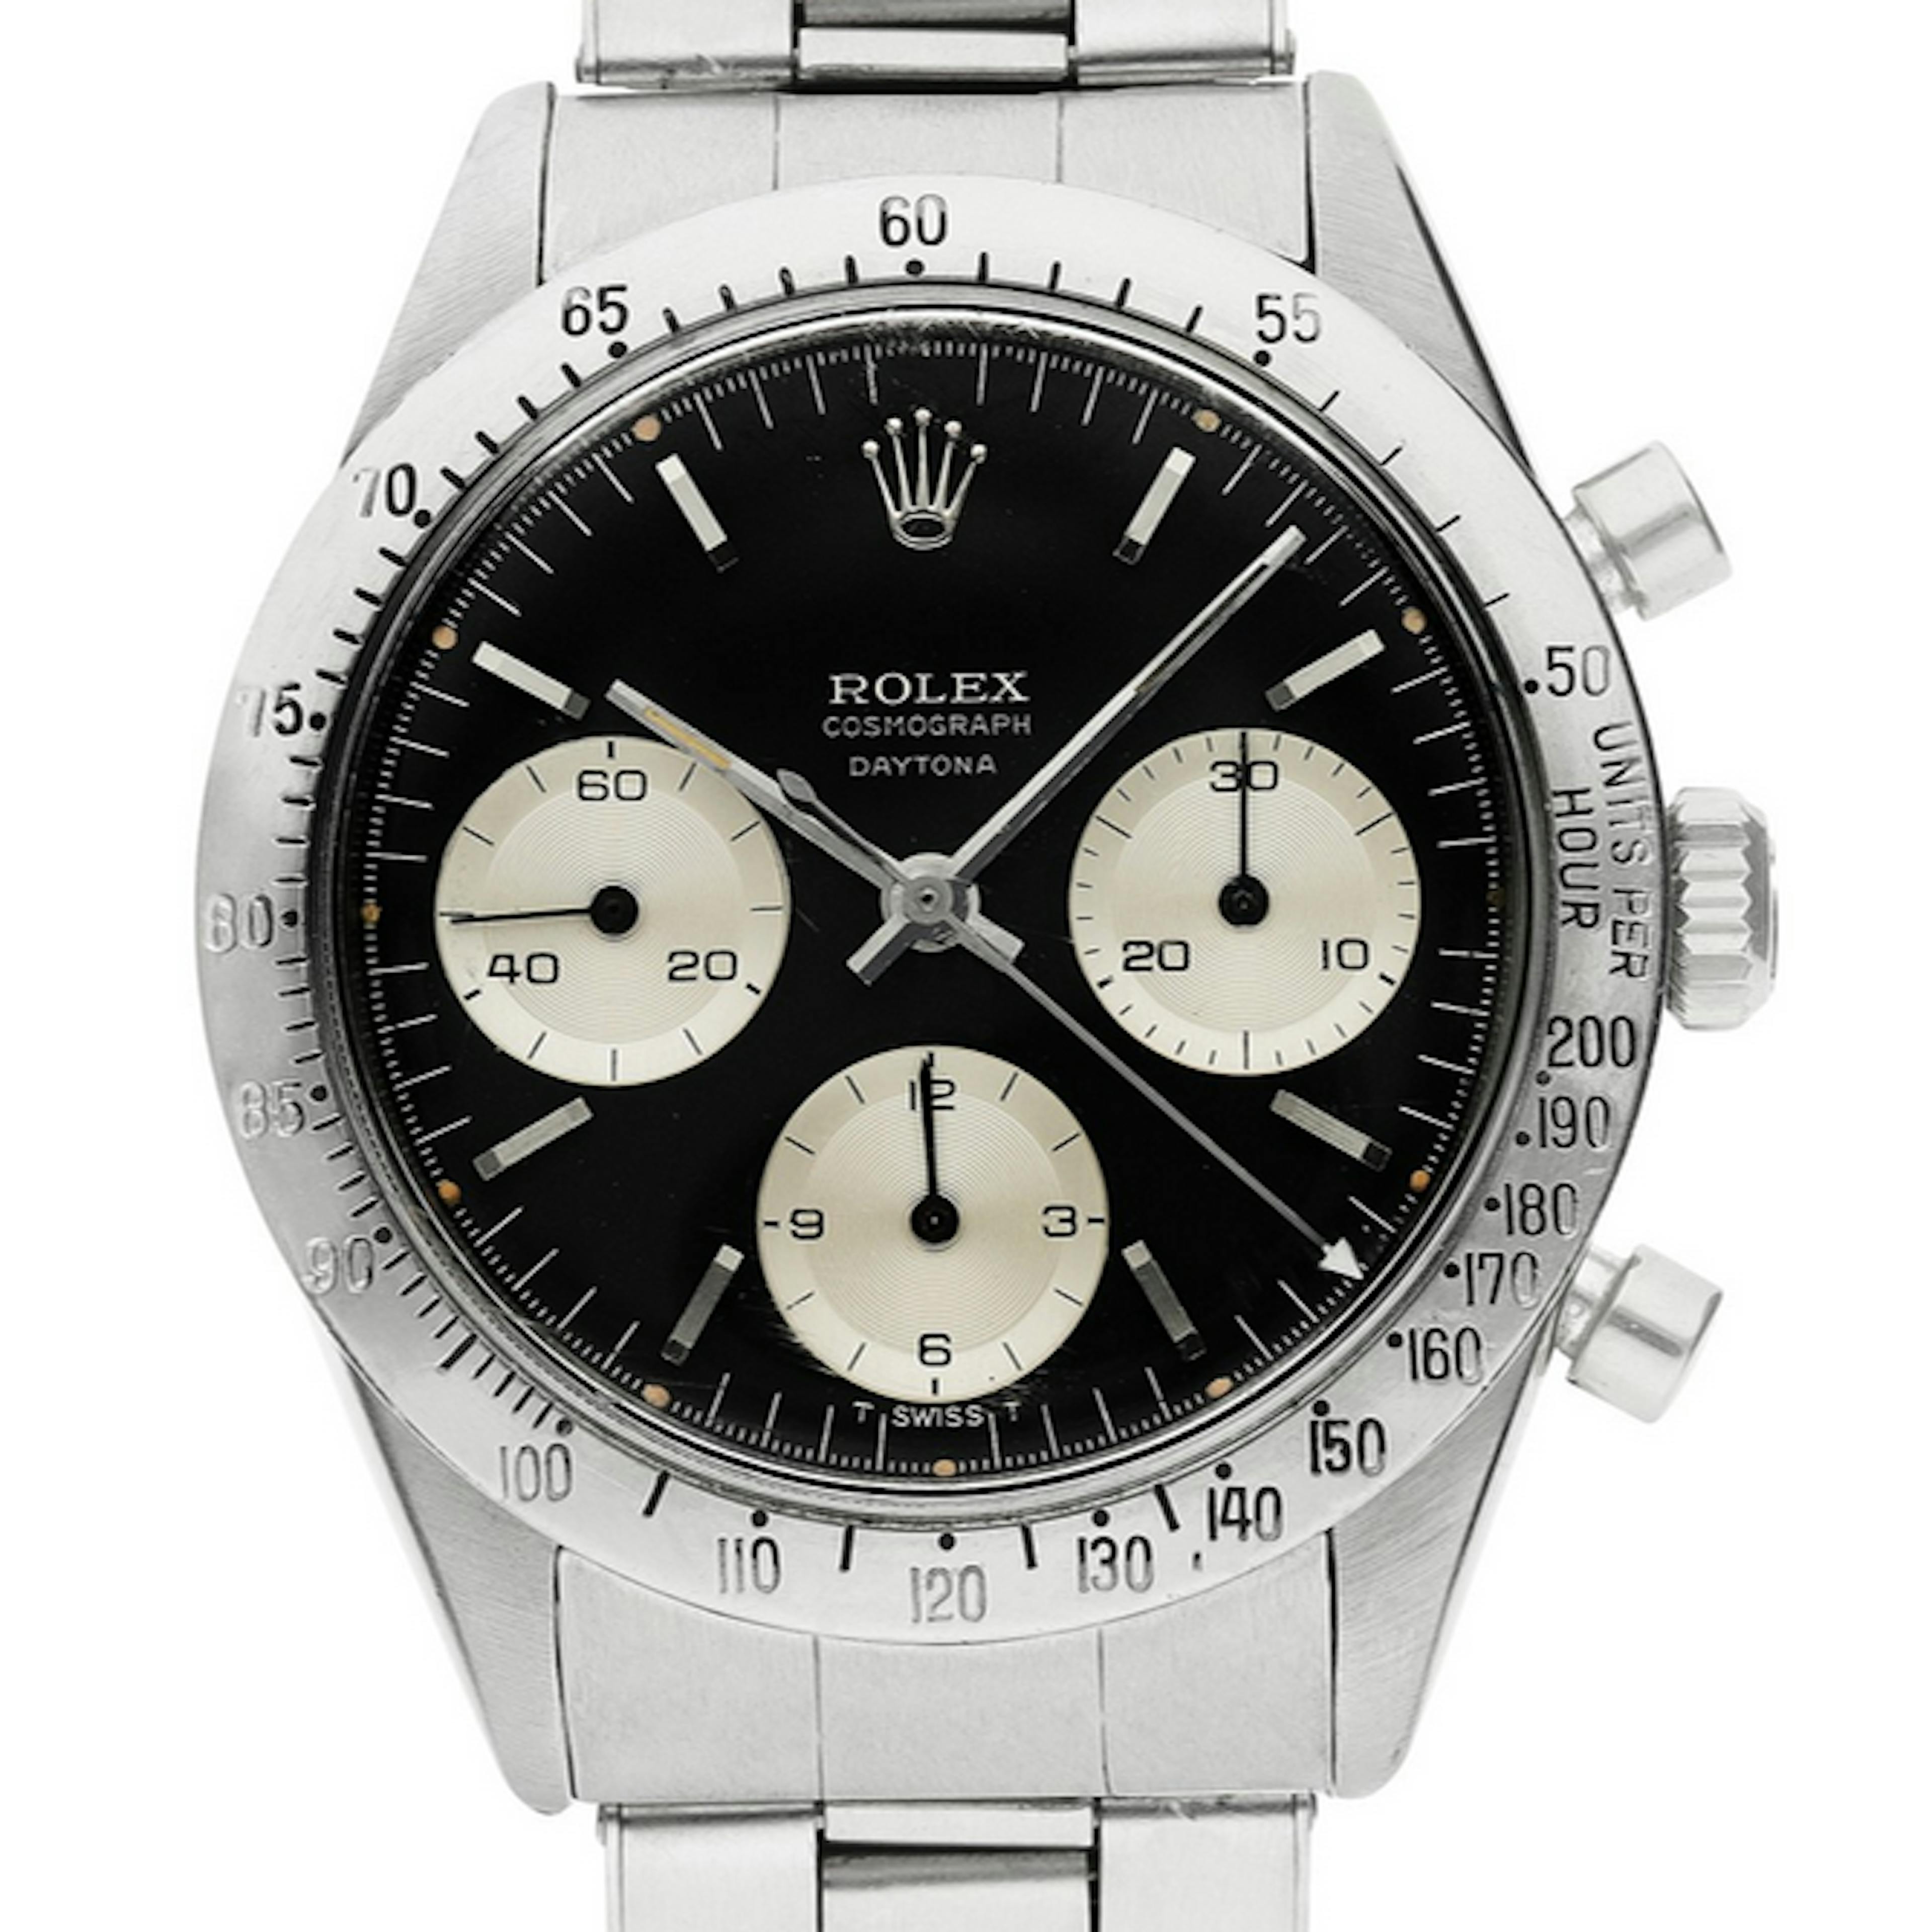 Rolex Daytona 6293 from 1964 - image from Sotheby's